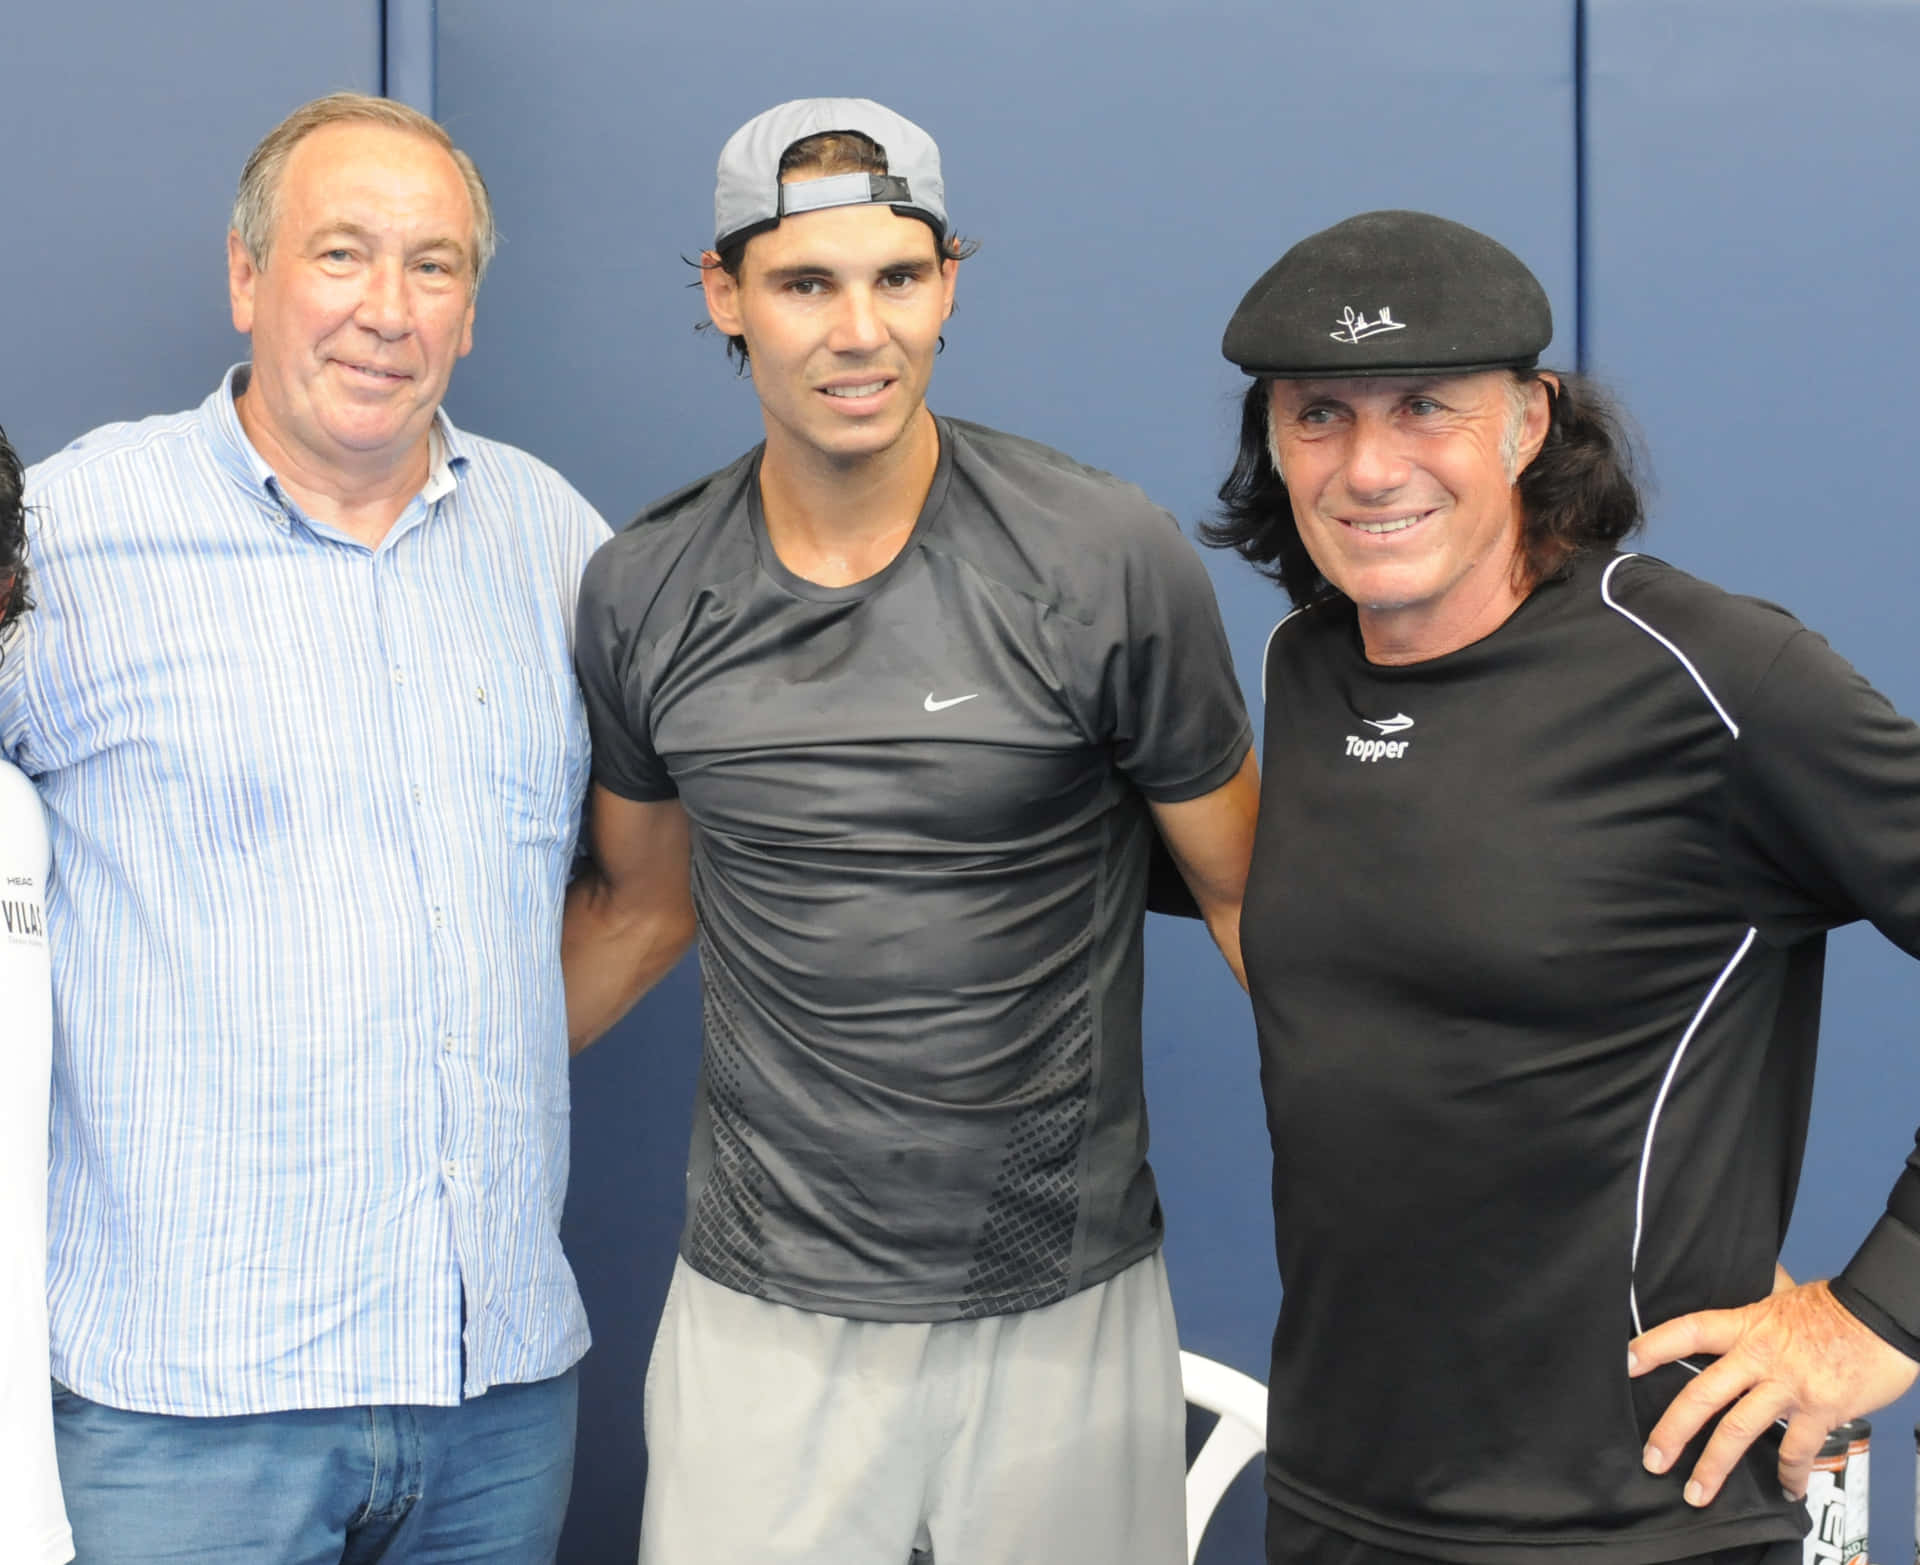 Tennis Star Guillermo Vilas And Rafael Nadal With Fan Wallpaper